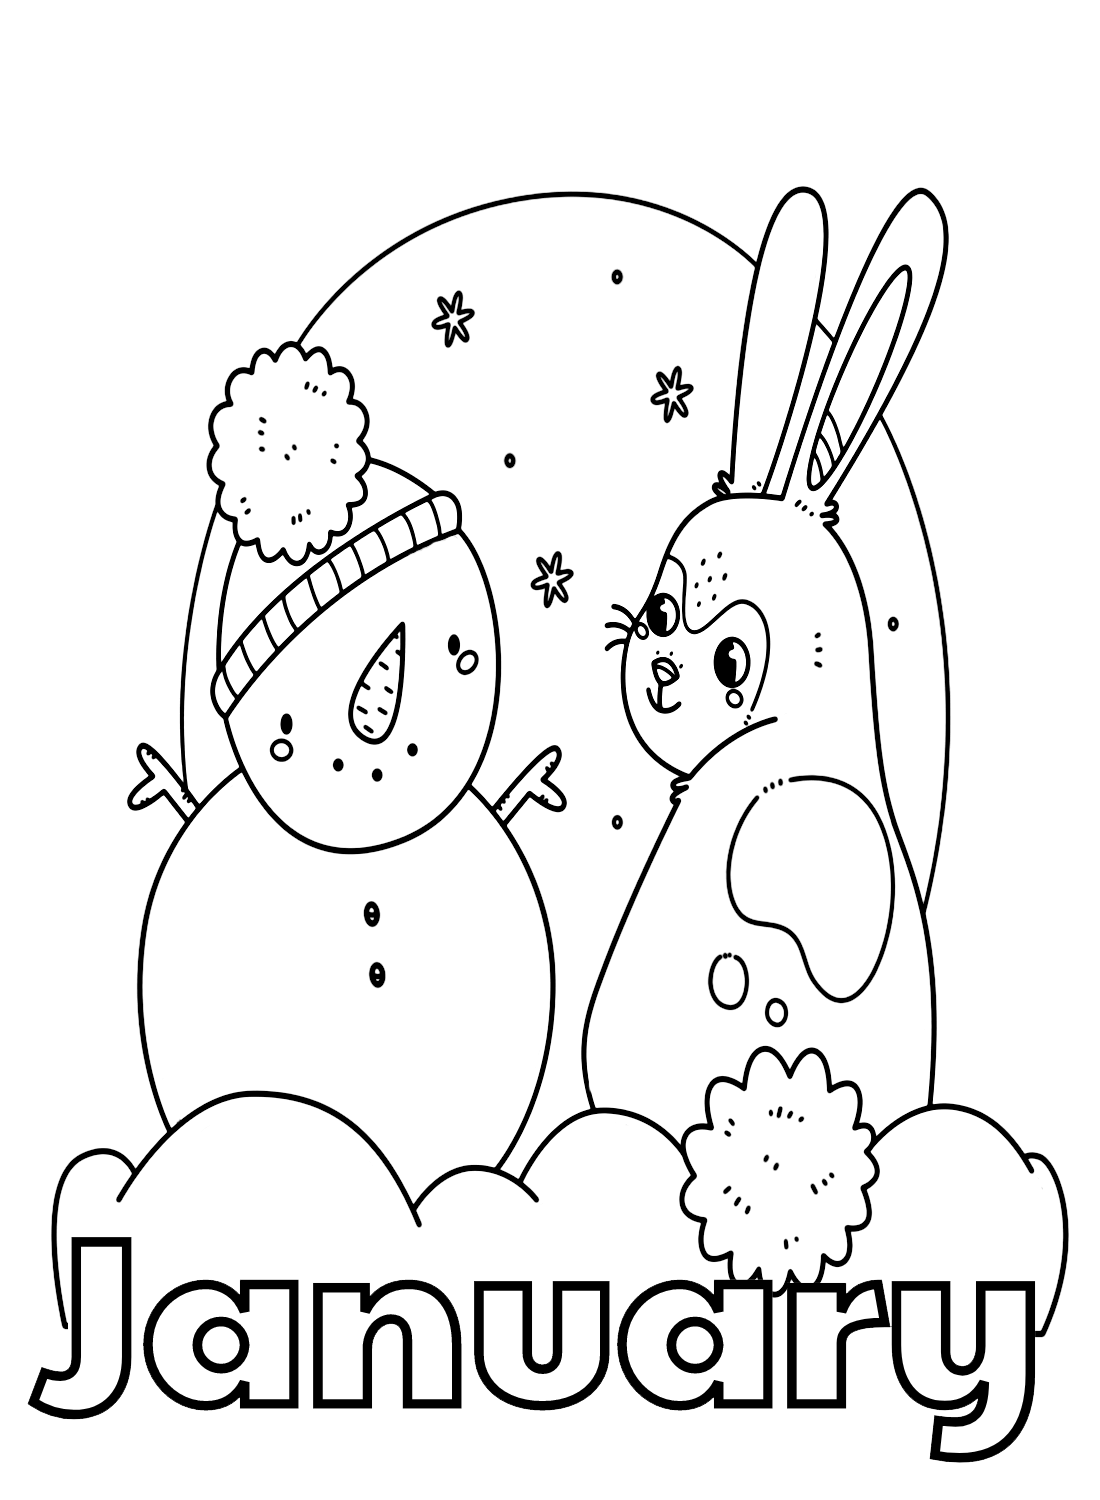 January with Snowman and Bunny Coloring Page - Free Printable Coloring ...